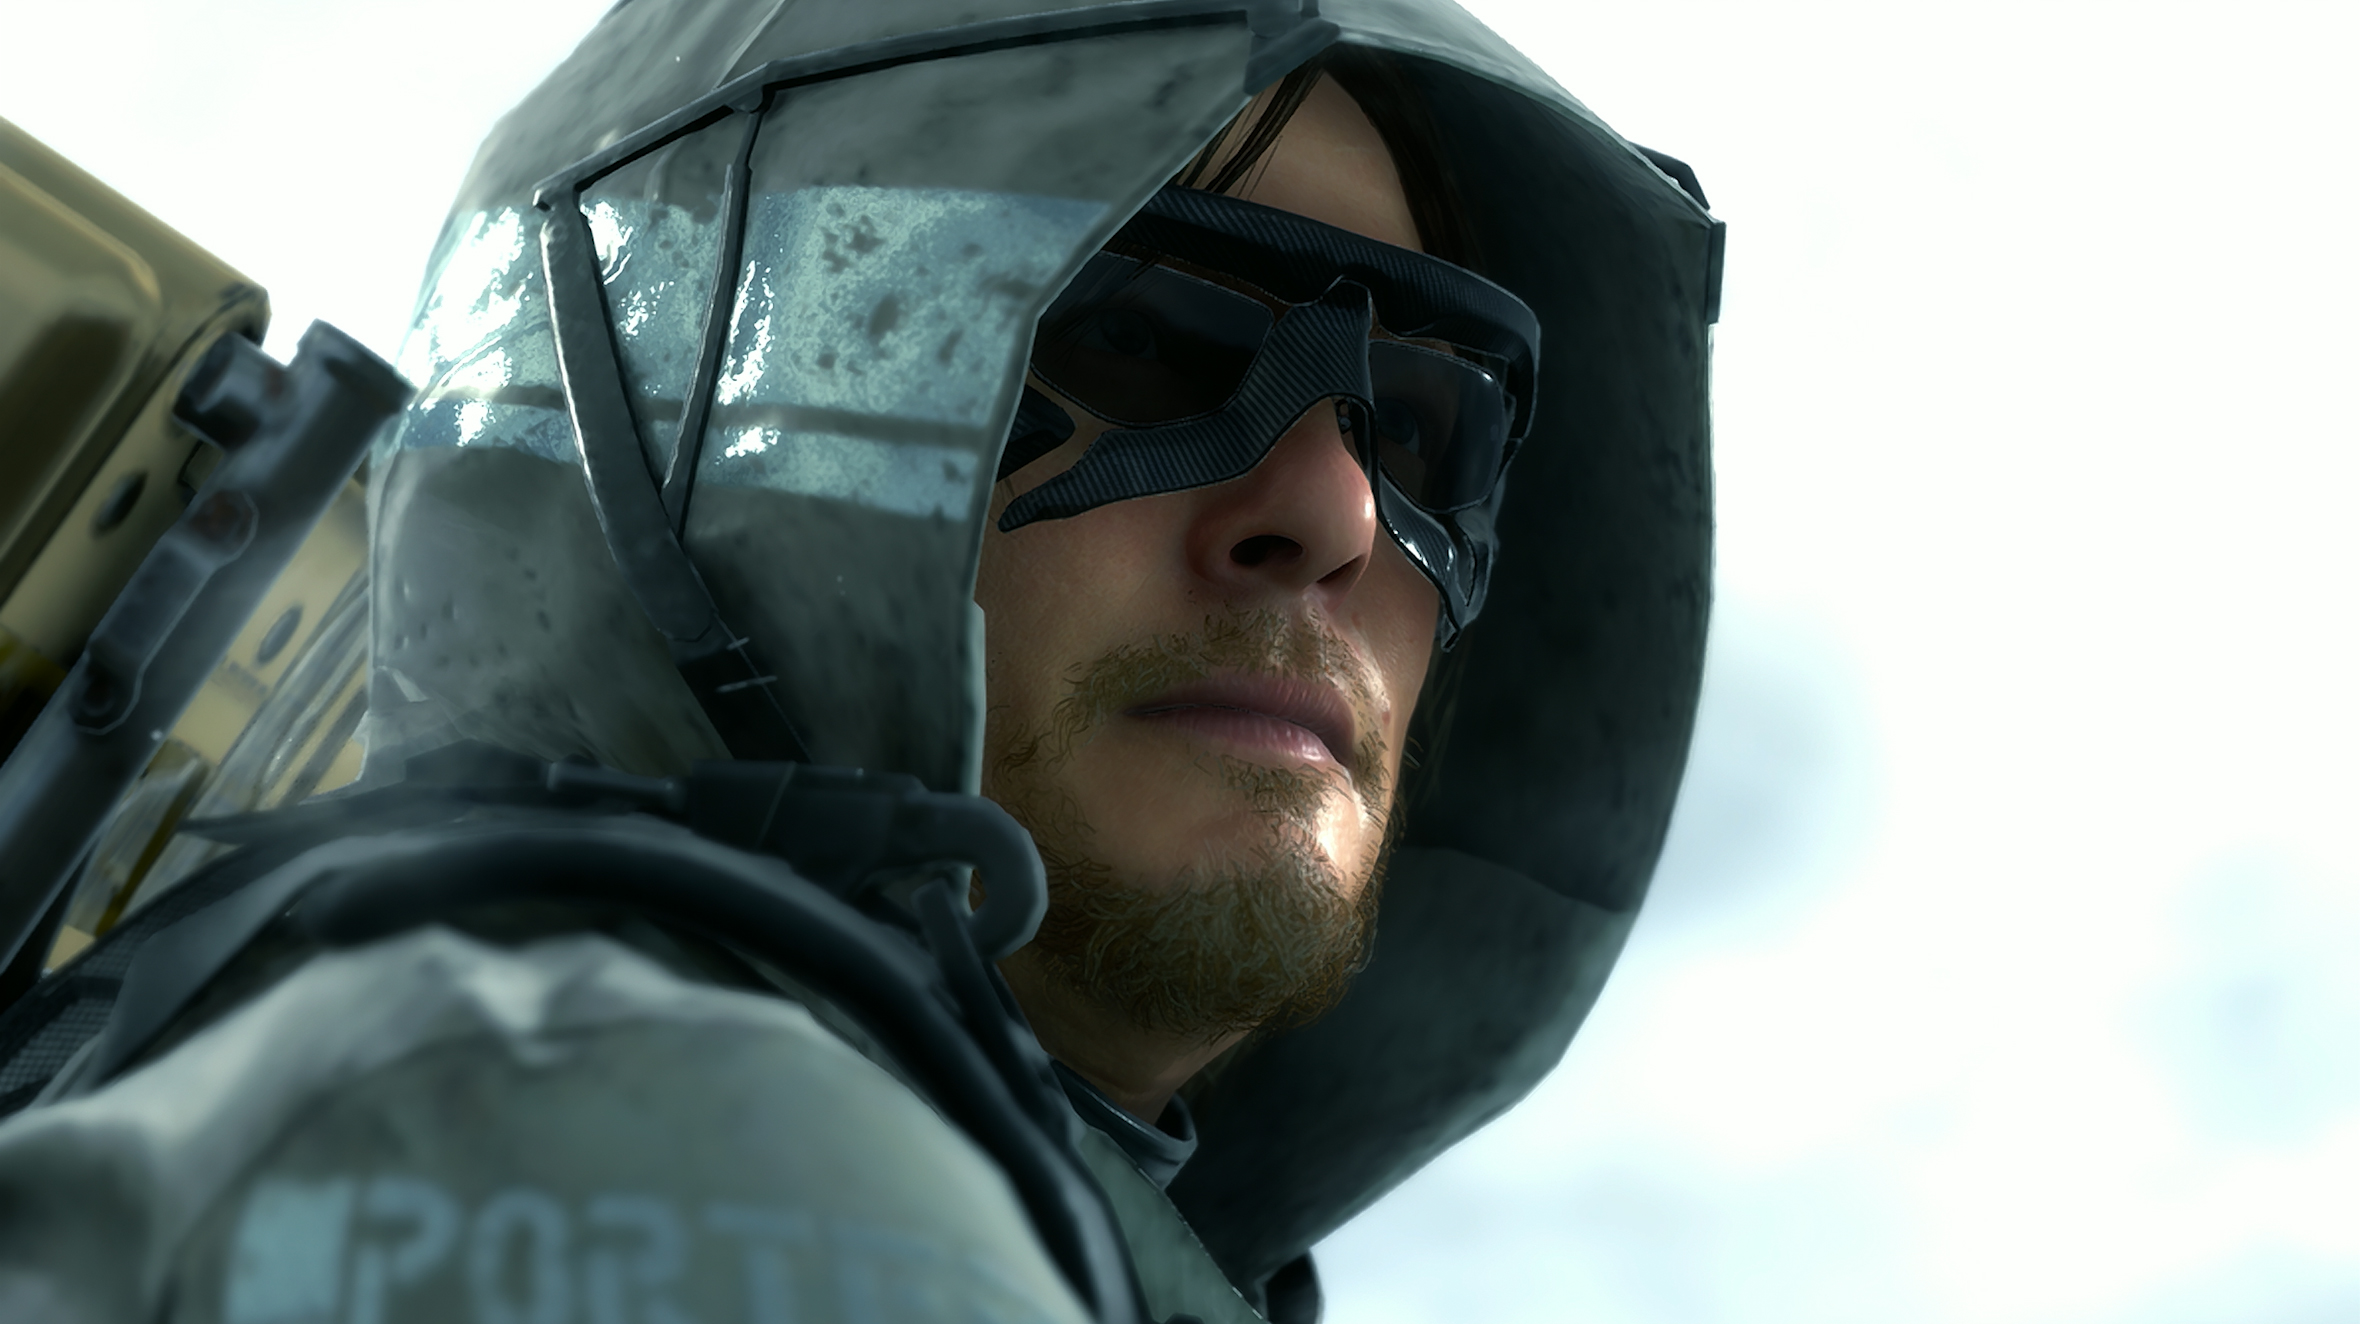 DEATH STRANDING DIRECTOR’S CUT OUT NOW ON THE APP STORE